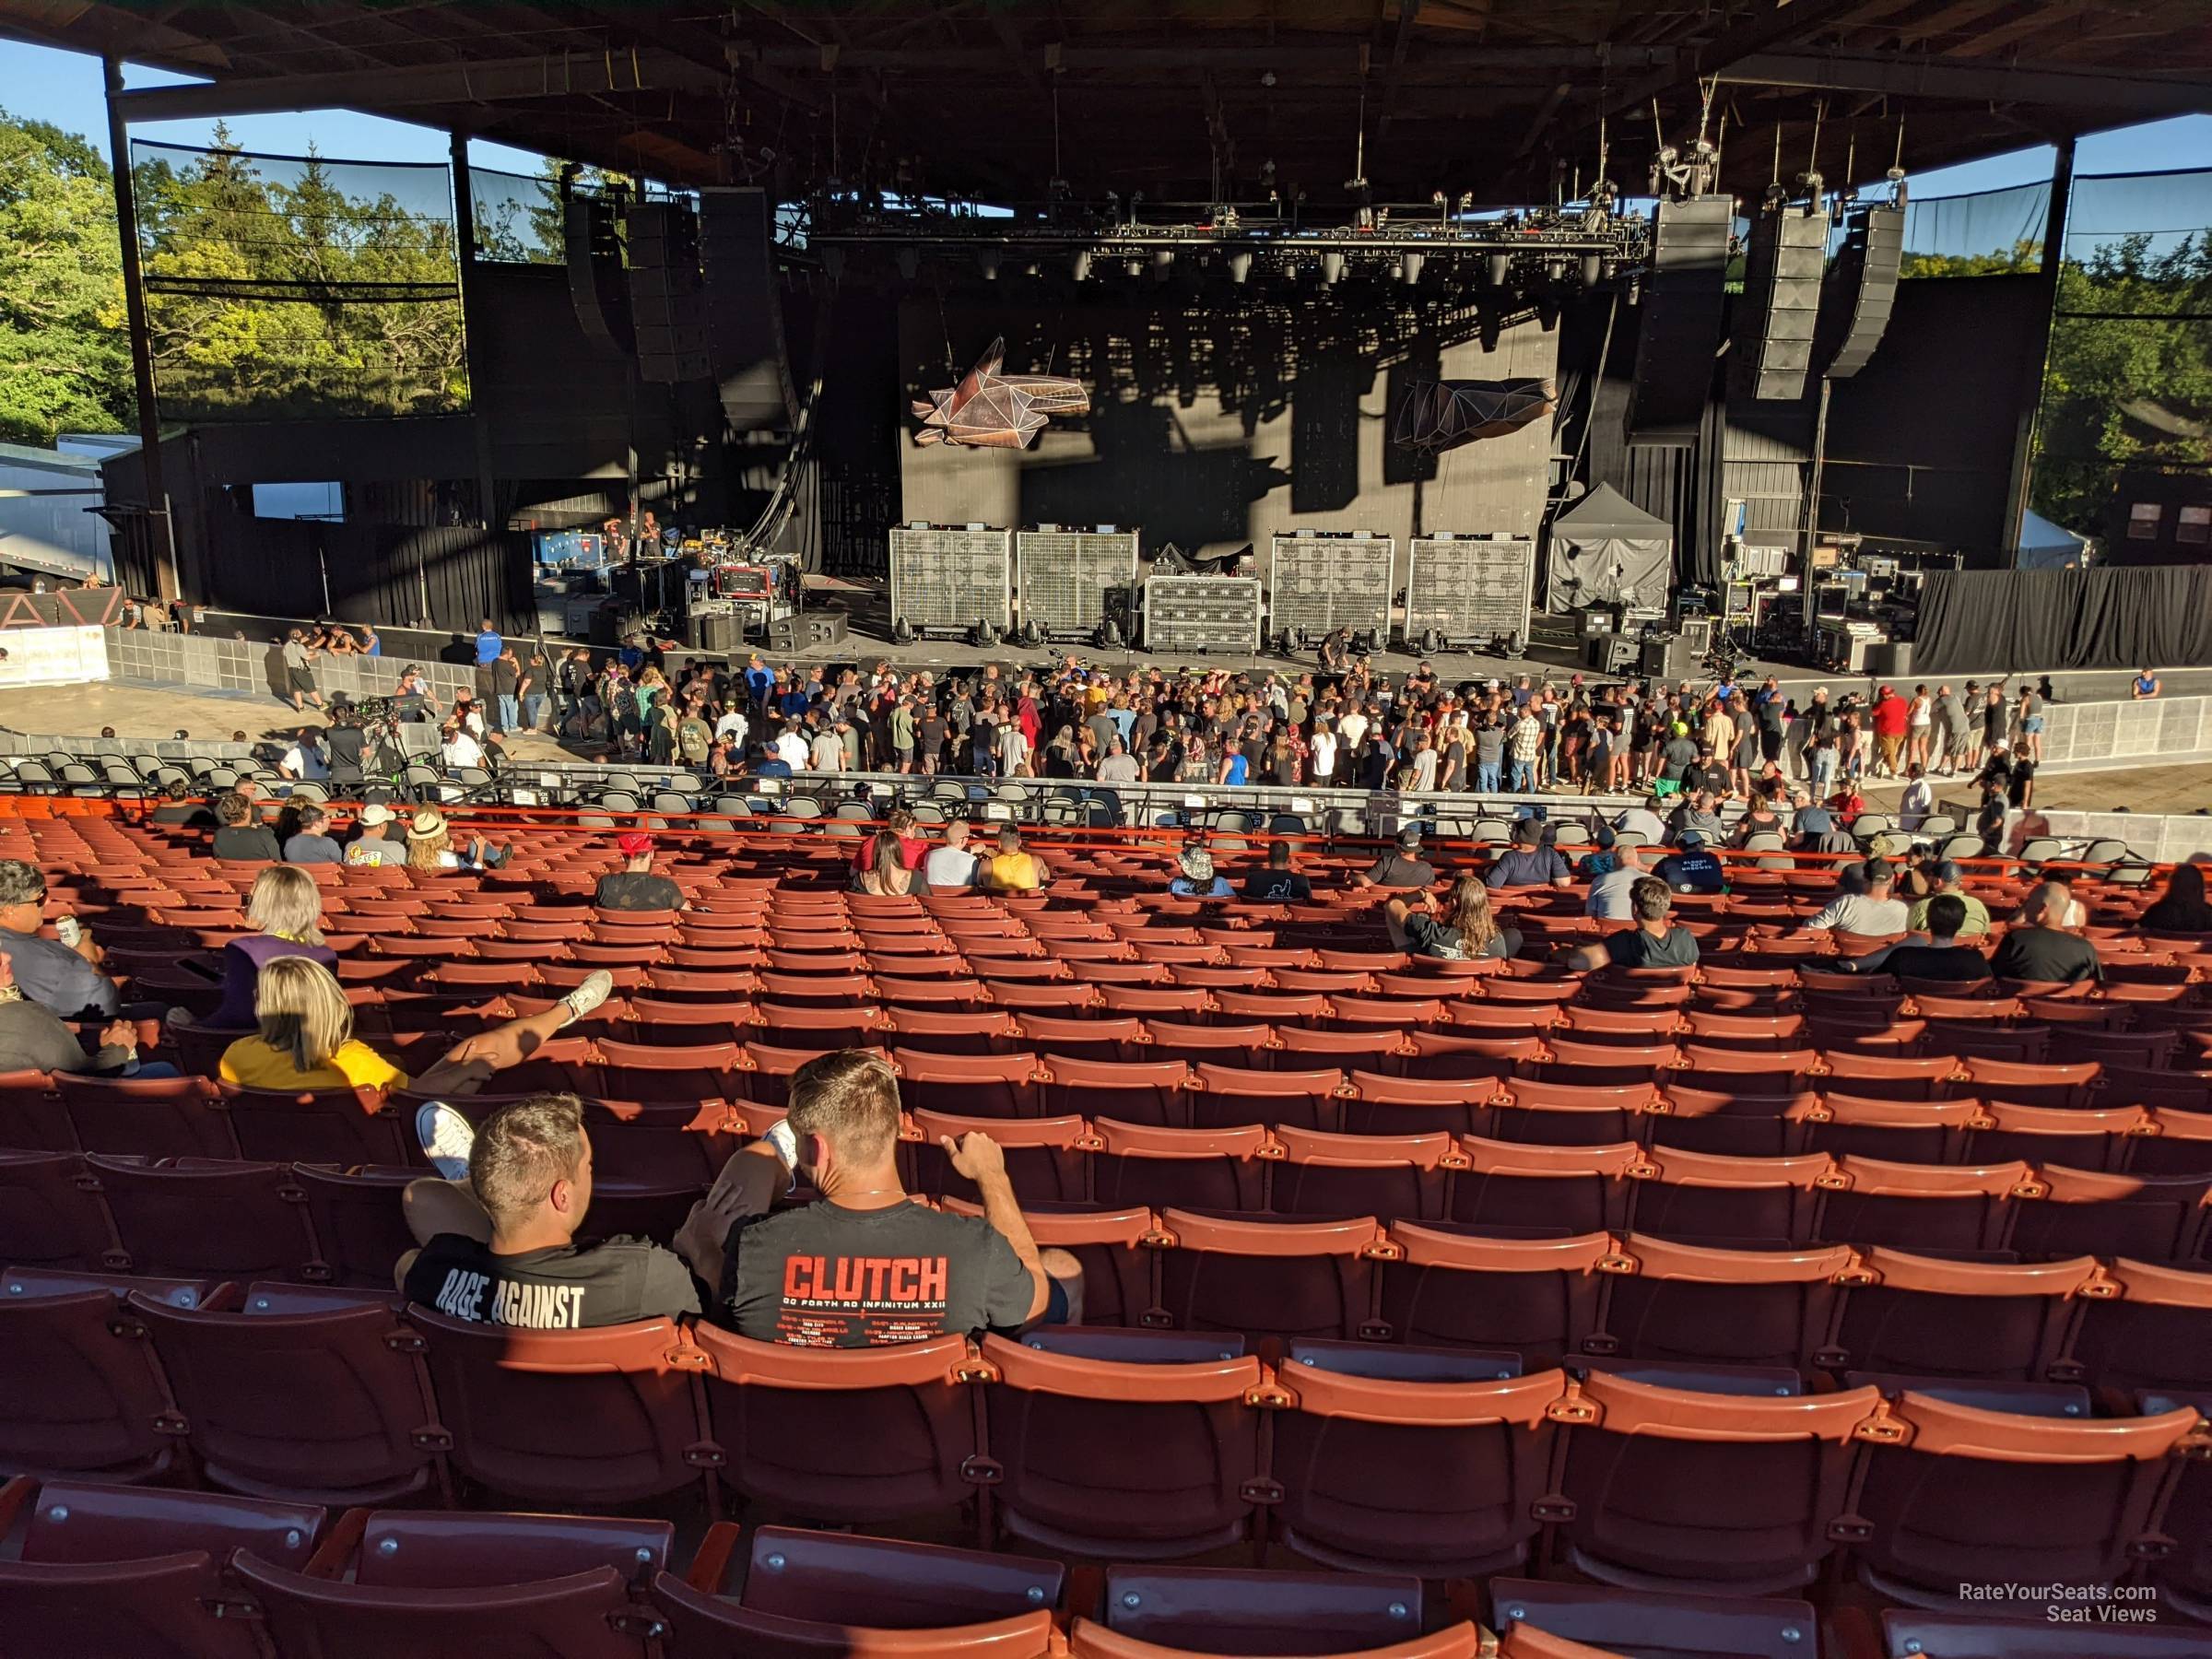 Section 202 at Alpine Valley Music Theatre